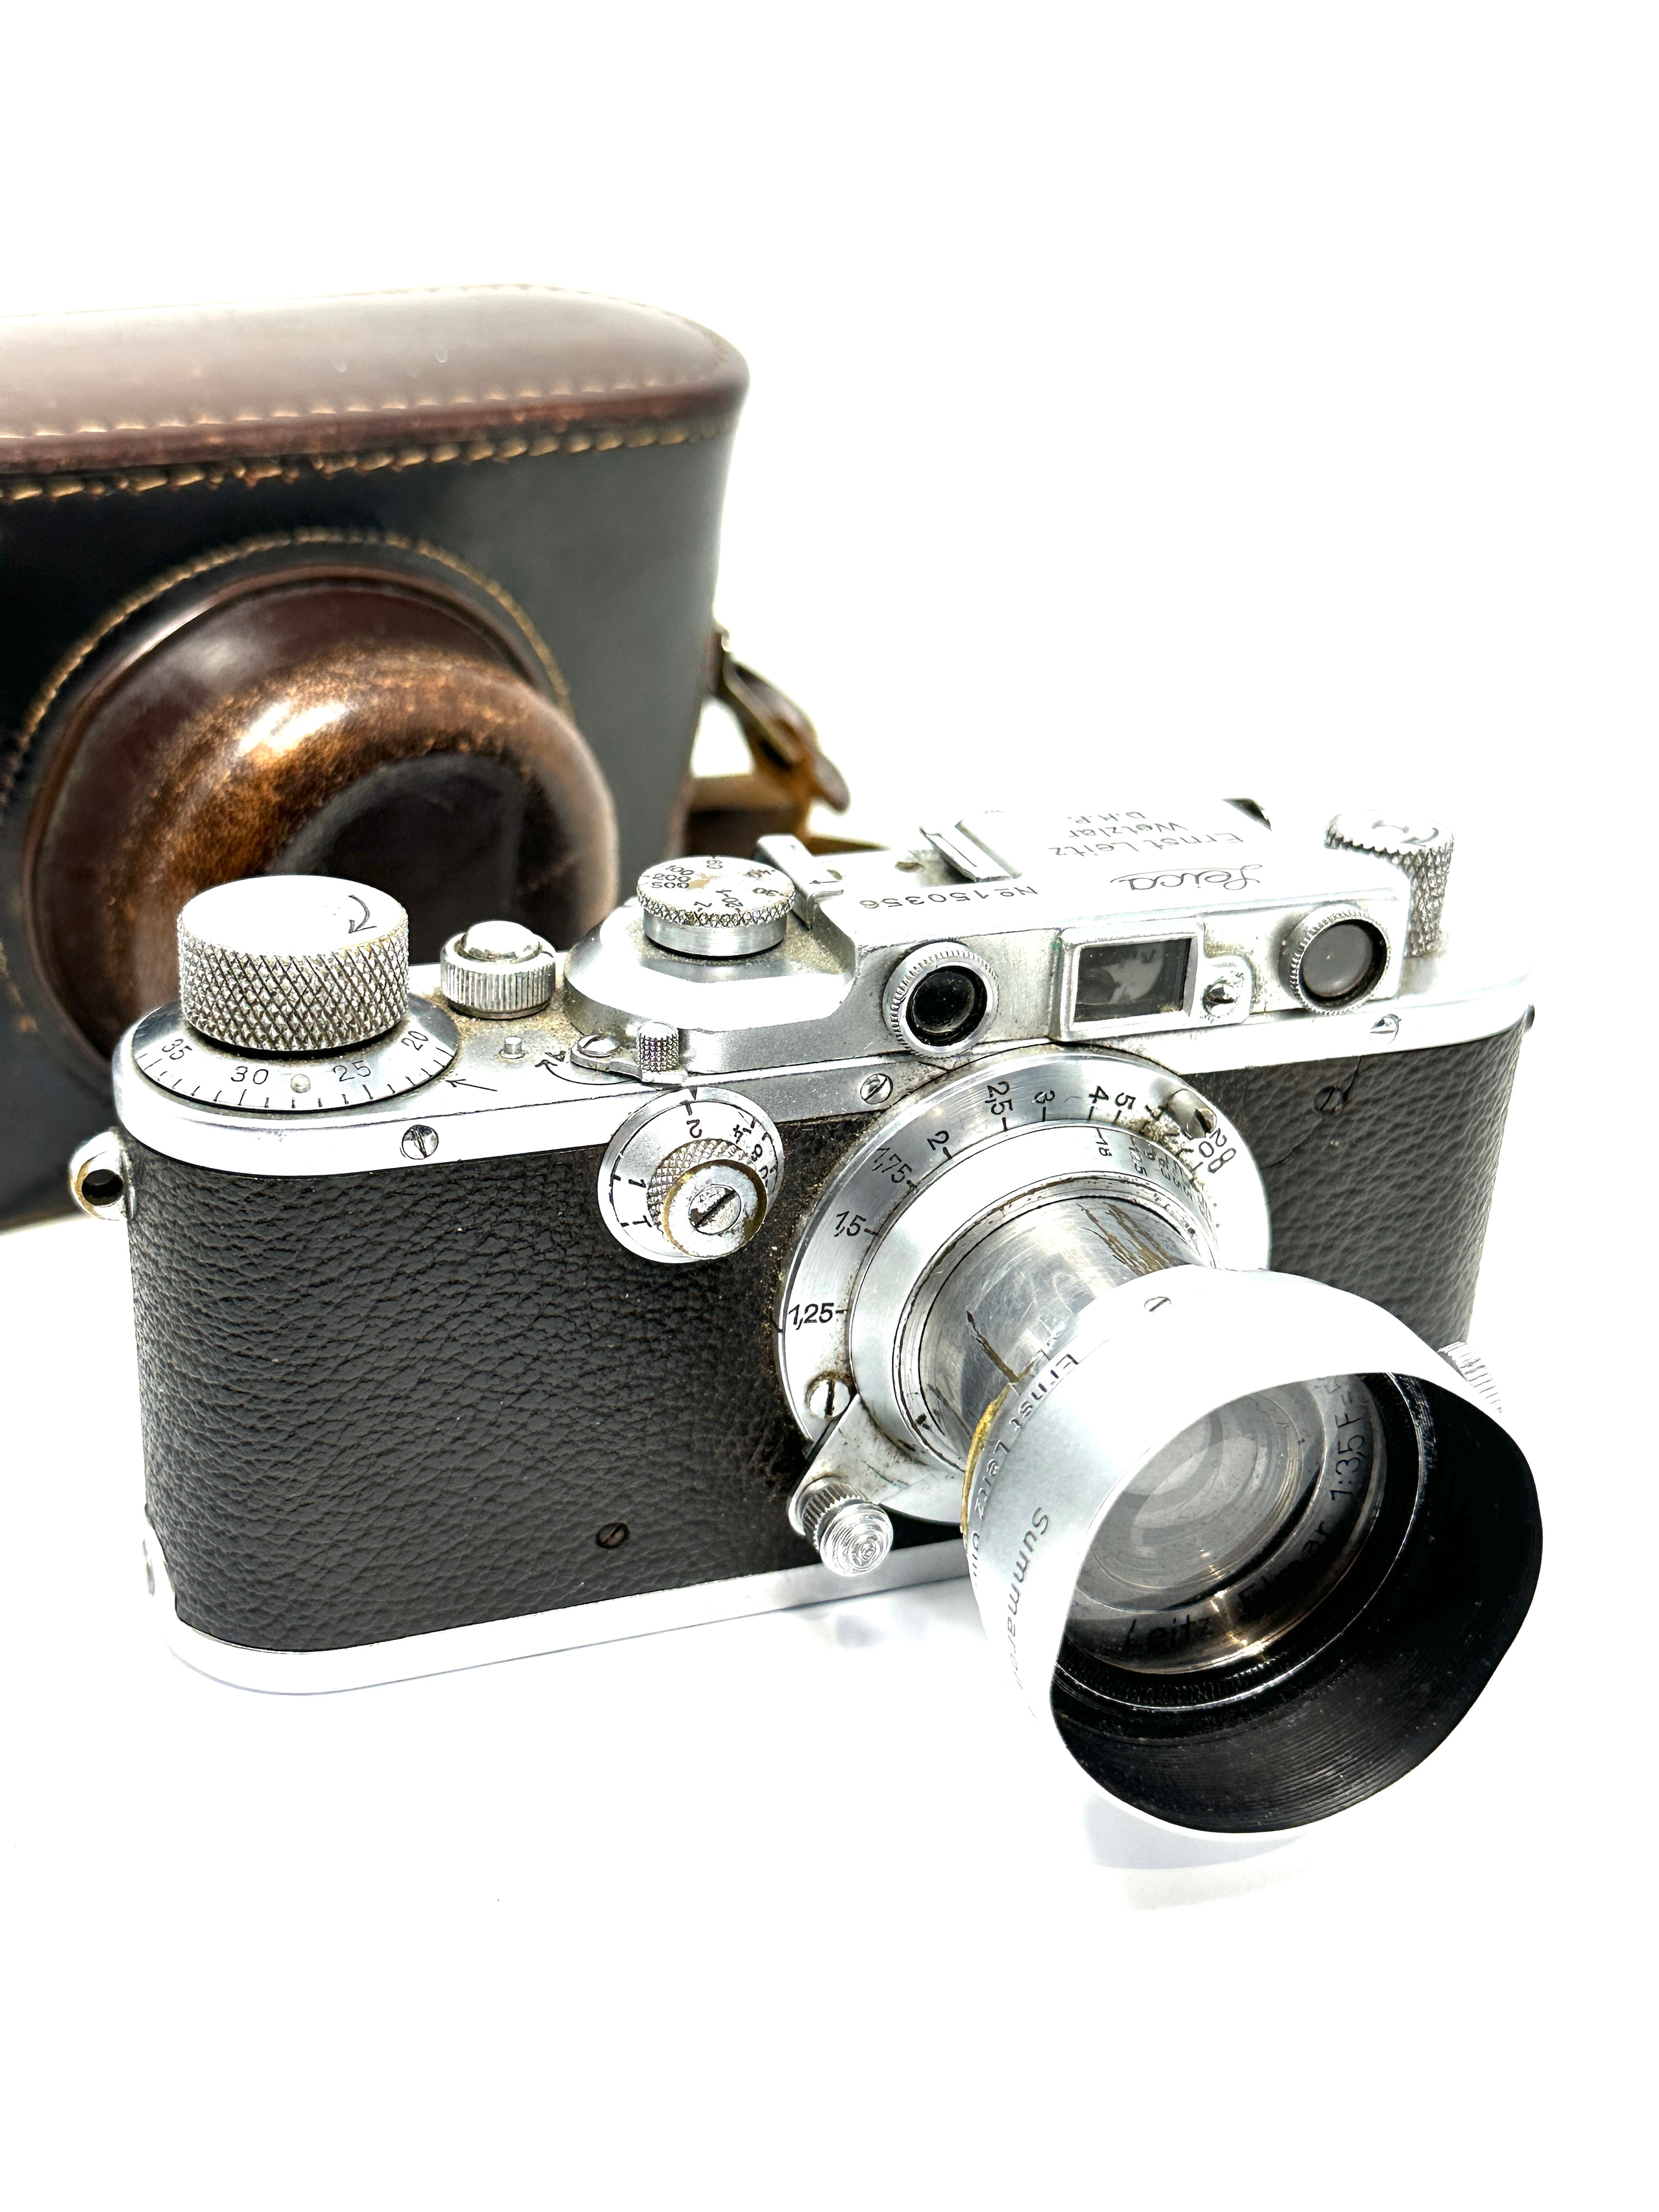 Vintage leica camera original leather cased reads Leica N 150356 Ernst Leitz d.r.p also reads on - Image 2 of 10